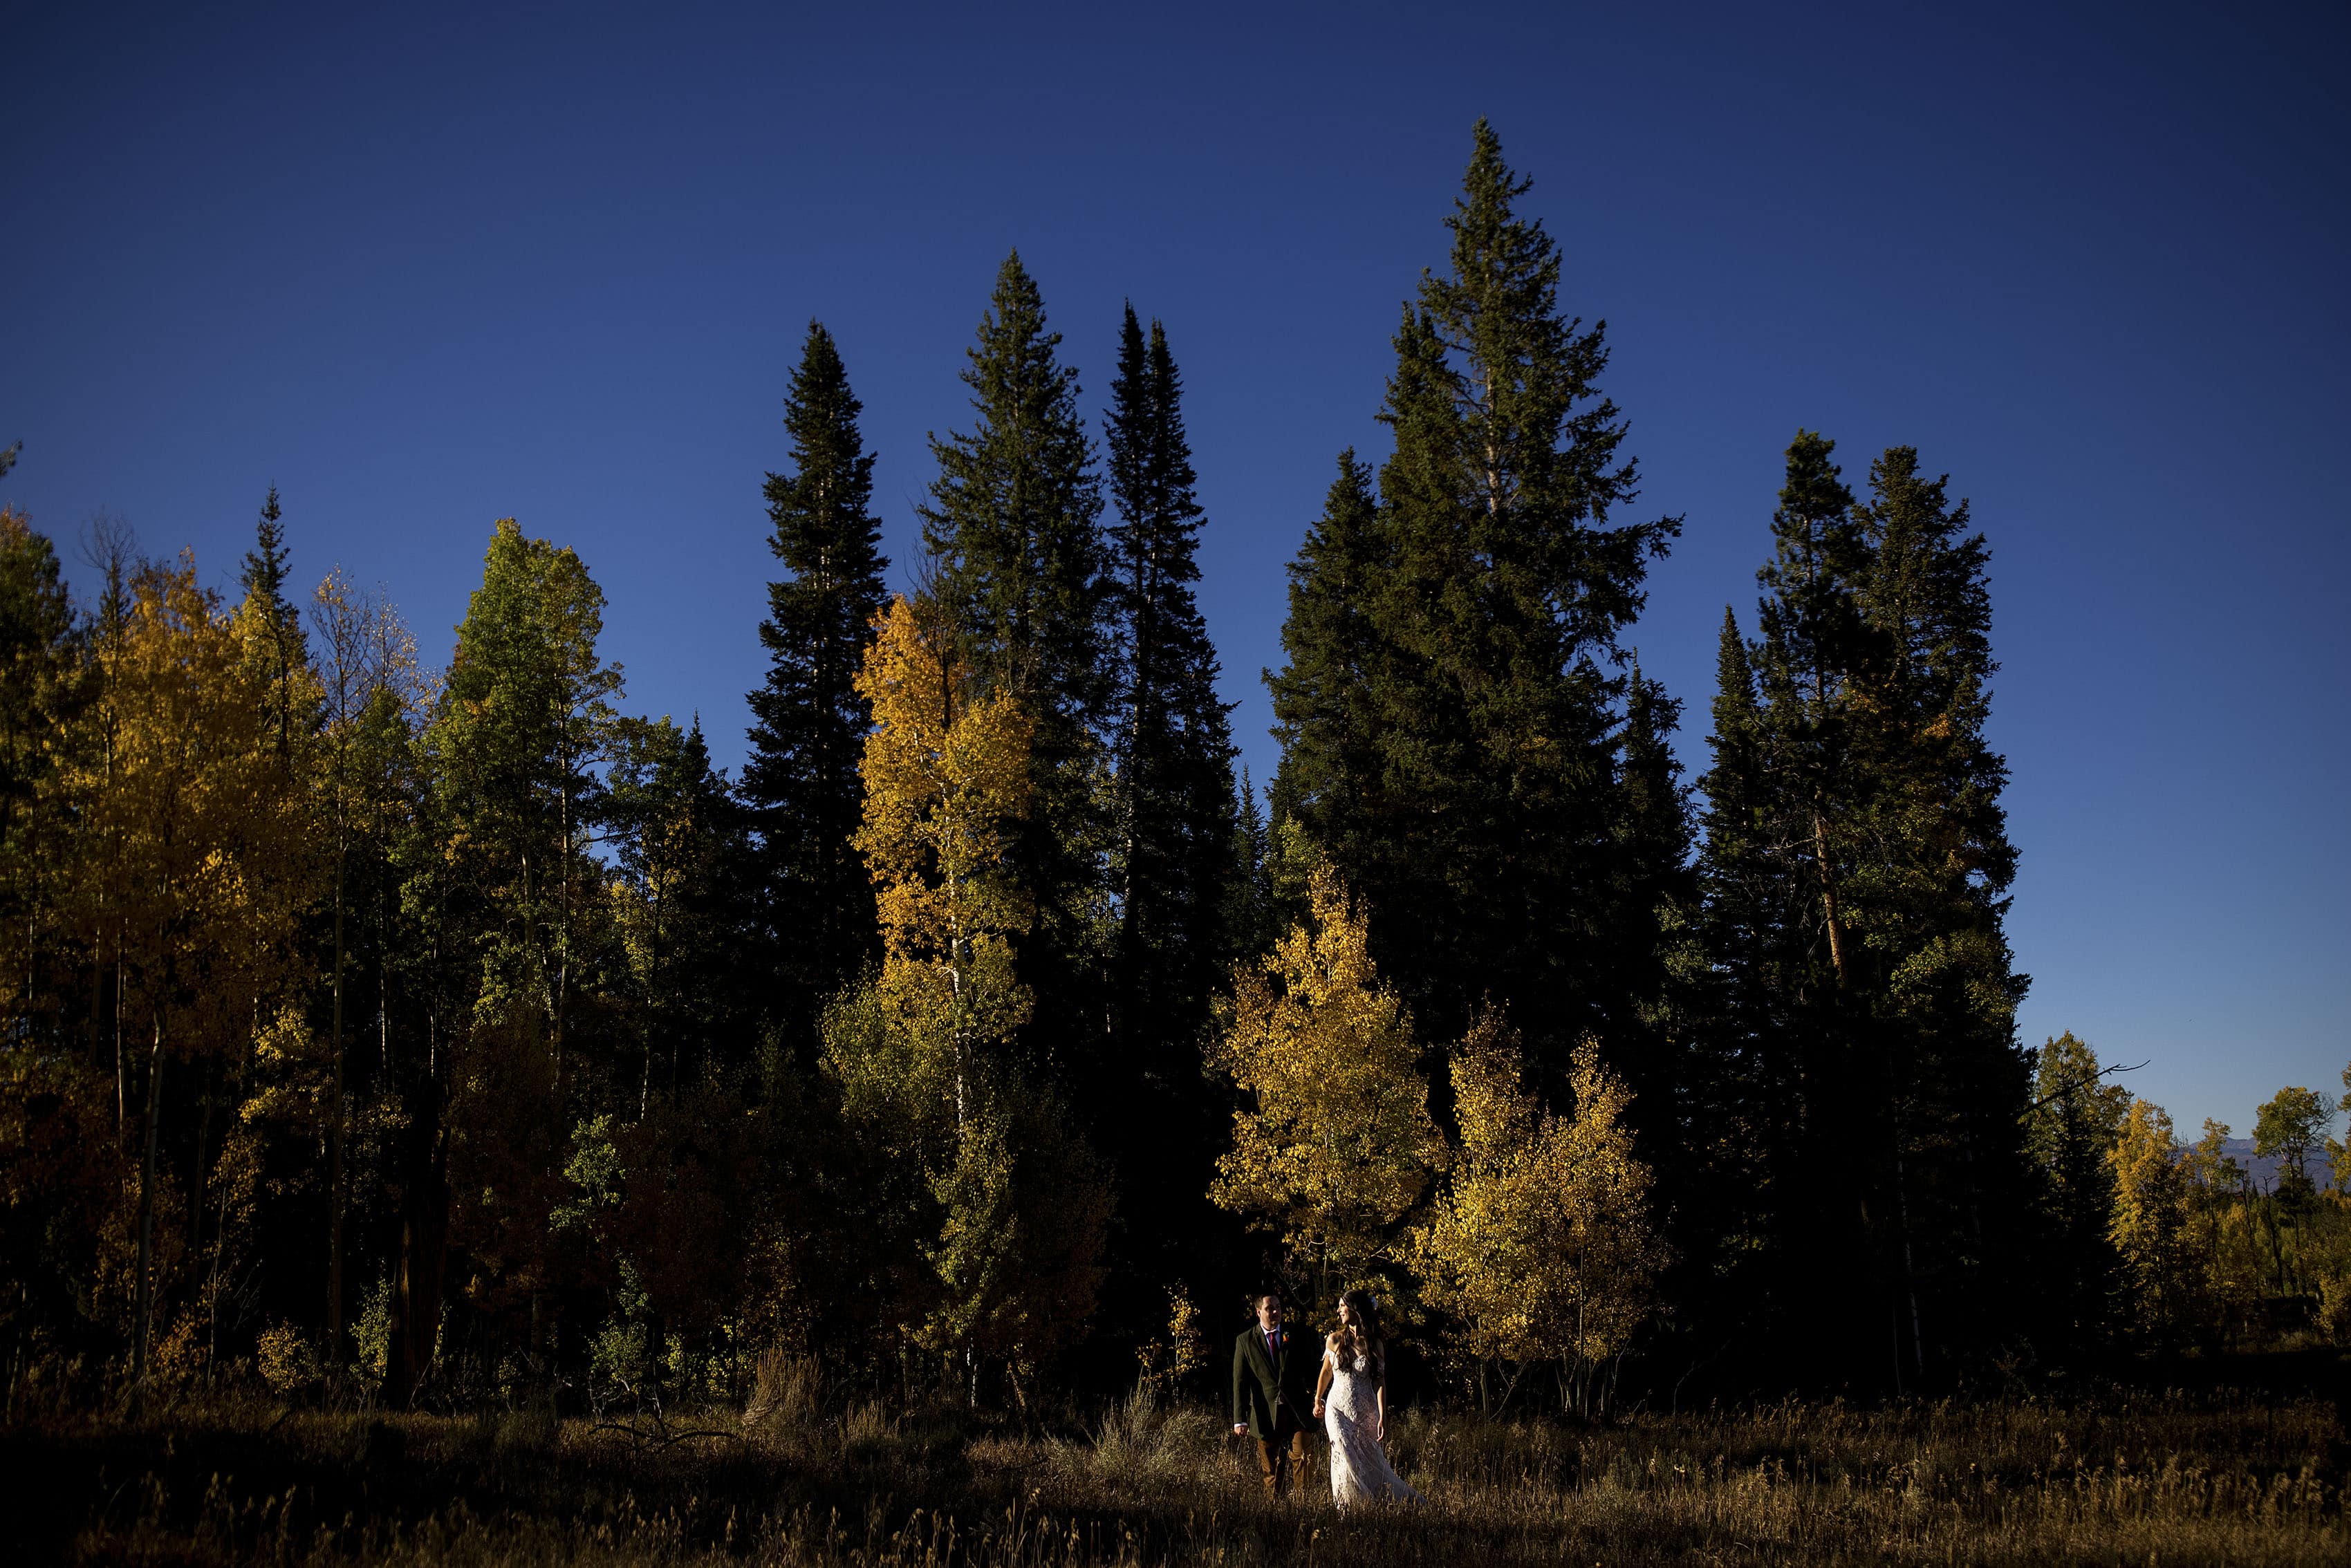 The bride and groom walk together in a field near fall colors at Snow Mountain Ranch